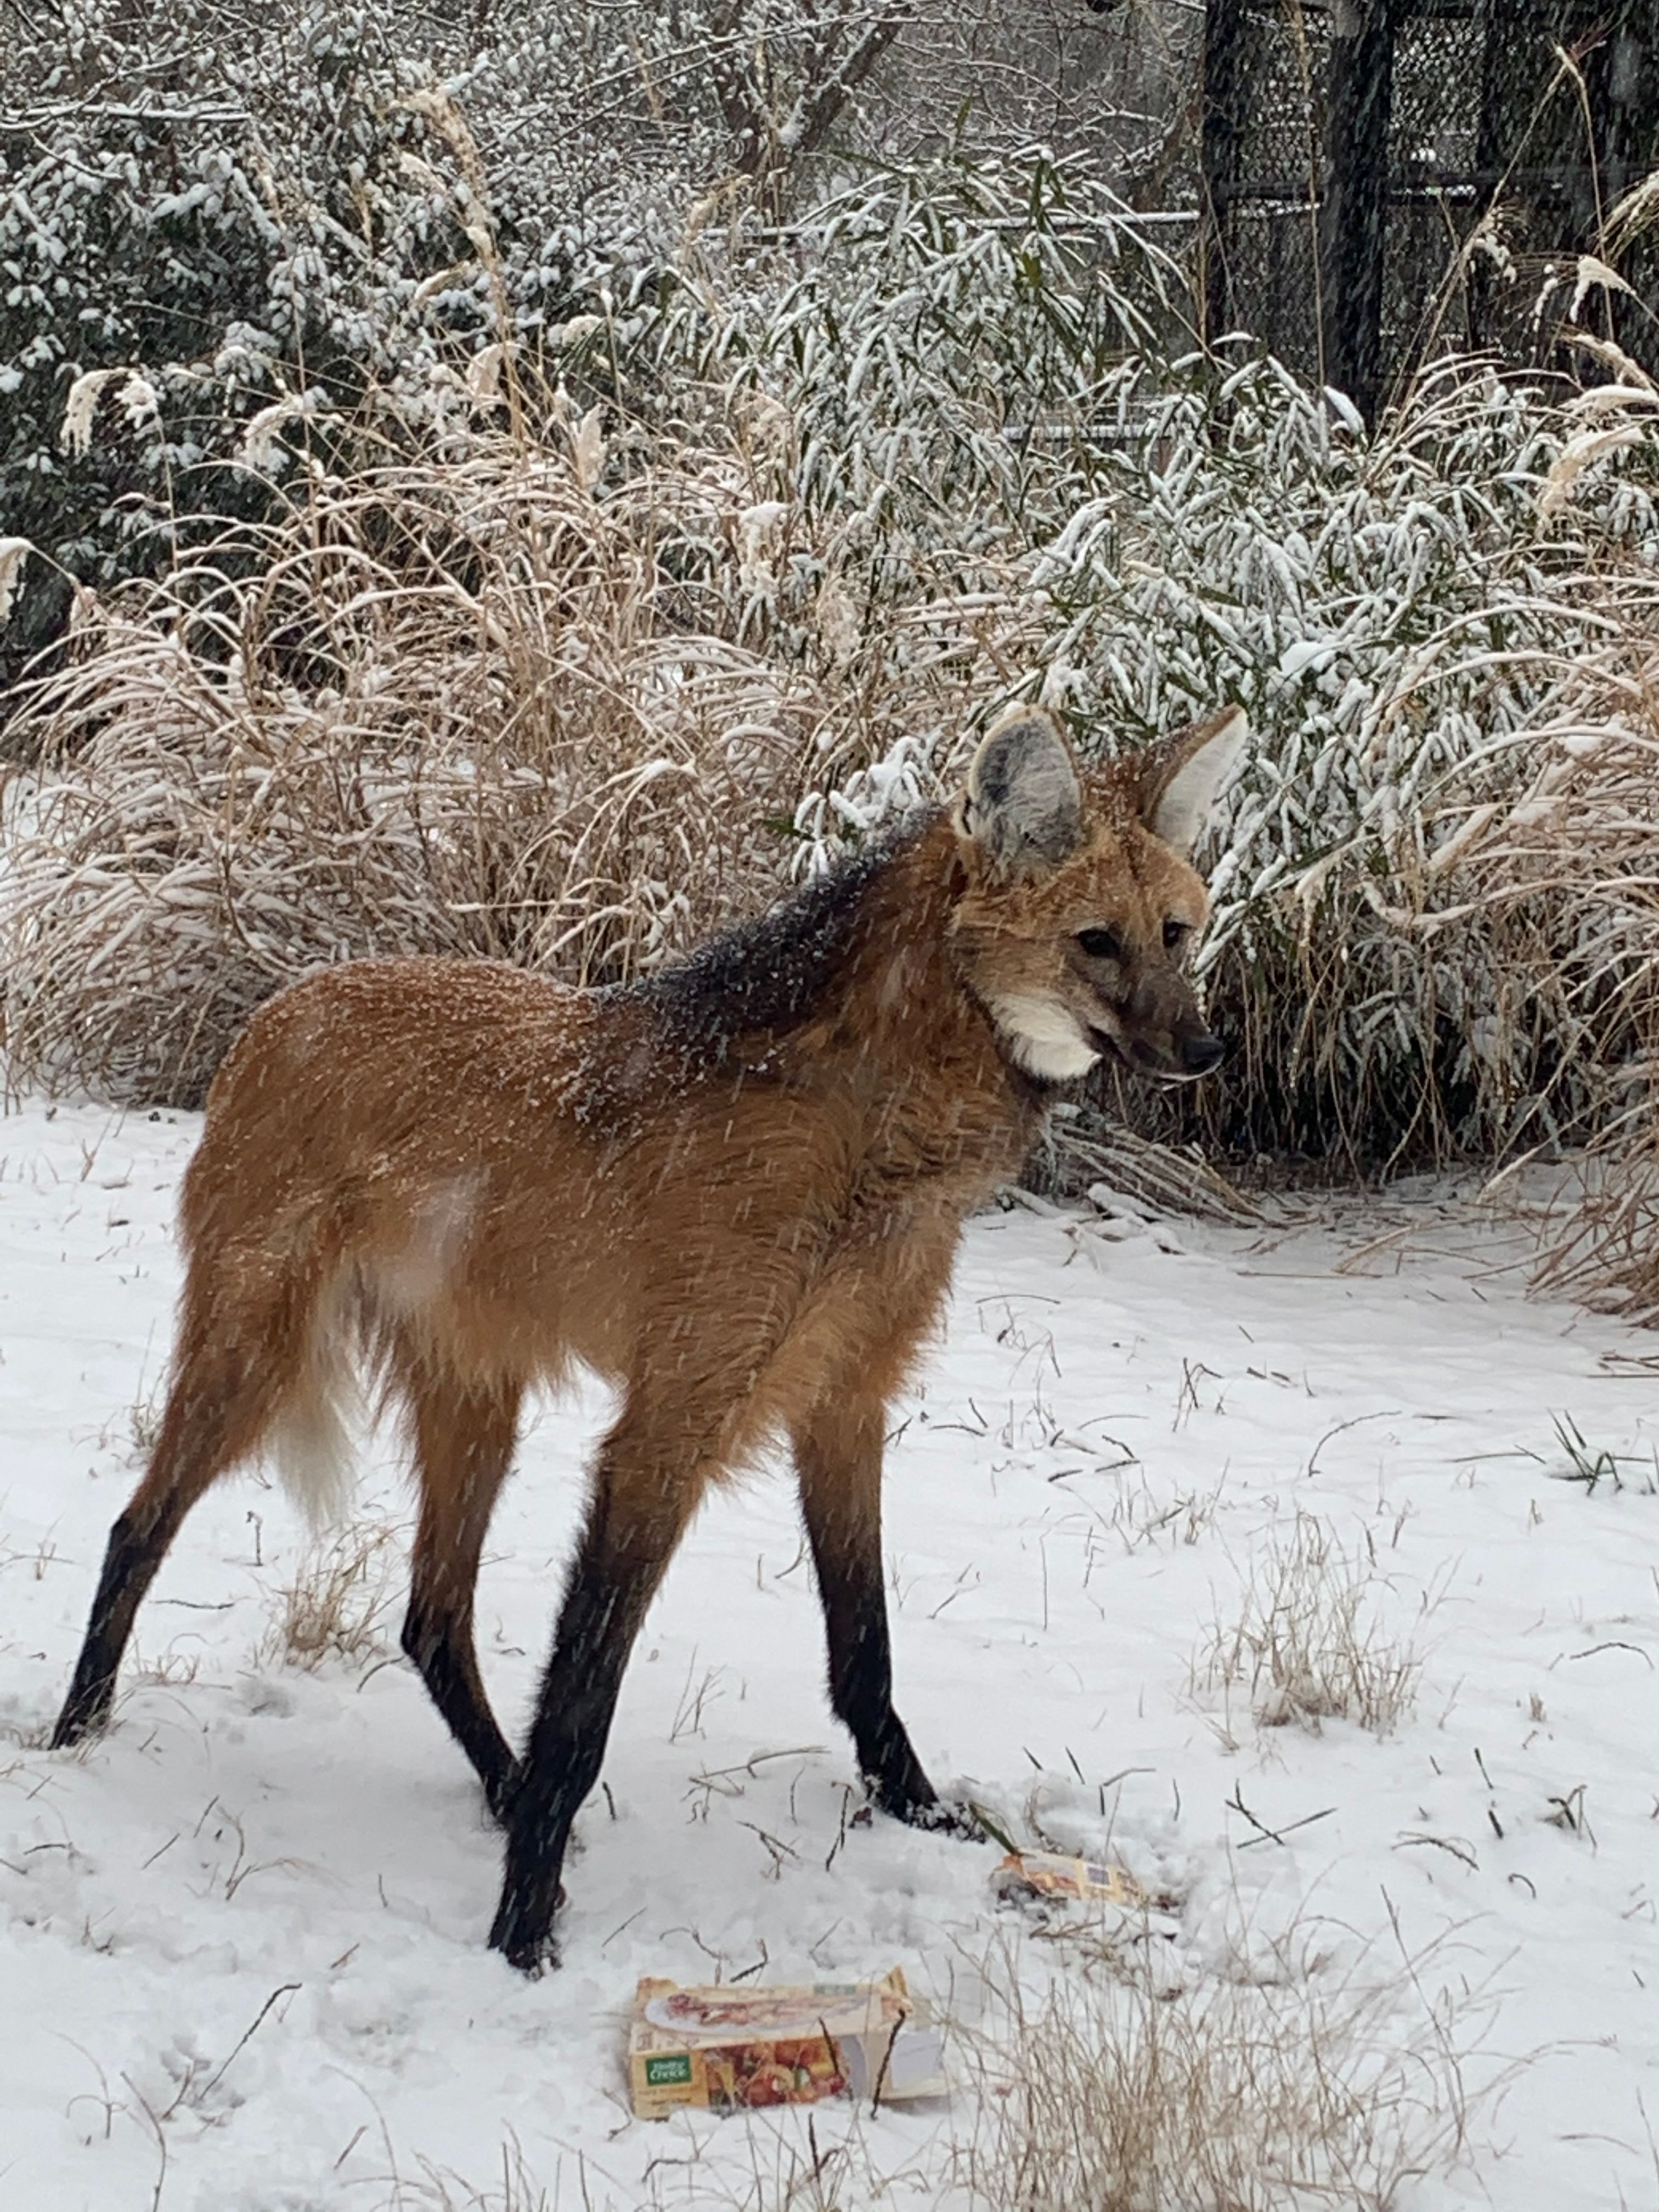 A maned wolf standing in the snow